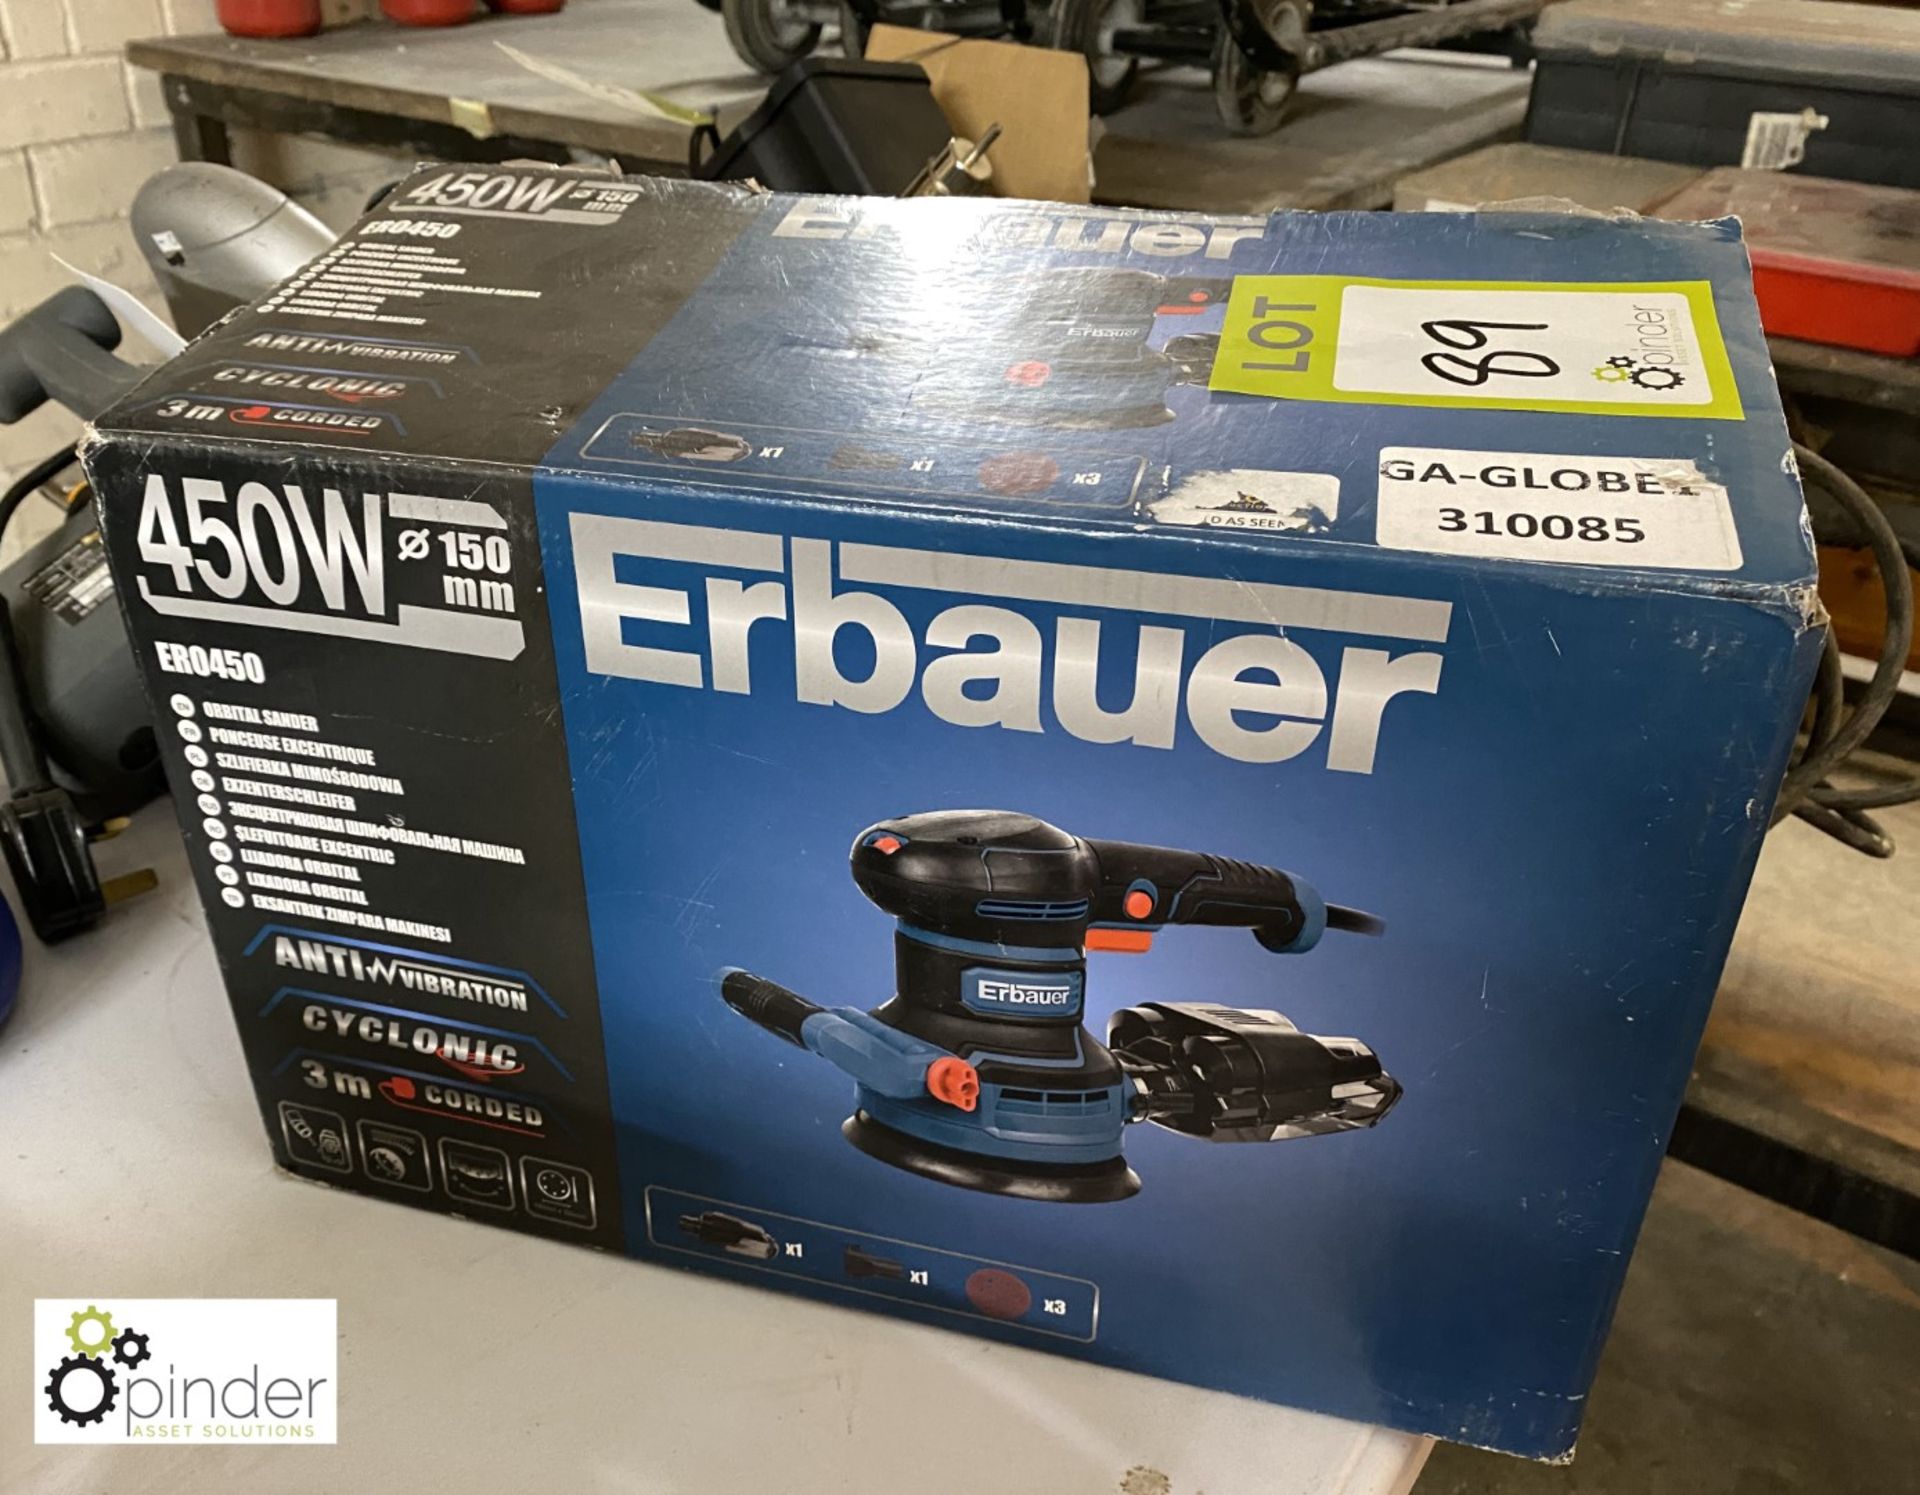 Erbauer ERO450 Orbital Sander, 240volts, with fabric case and box